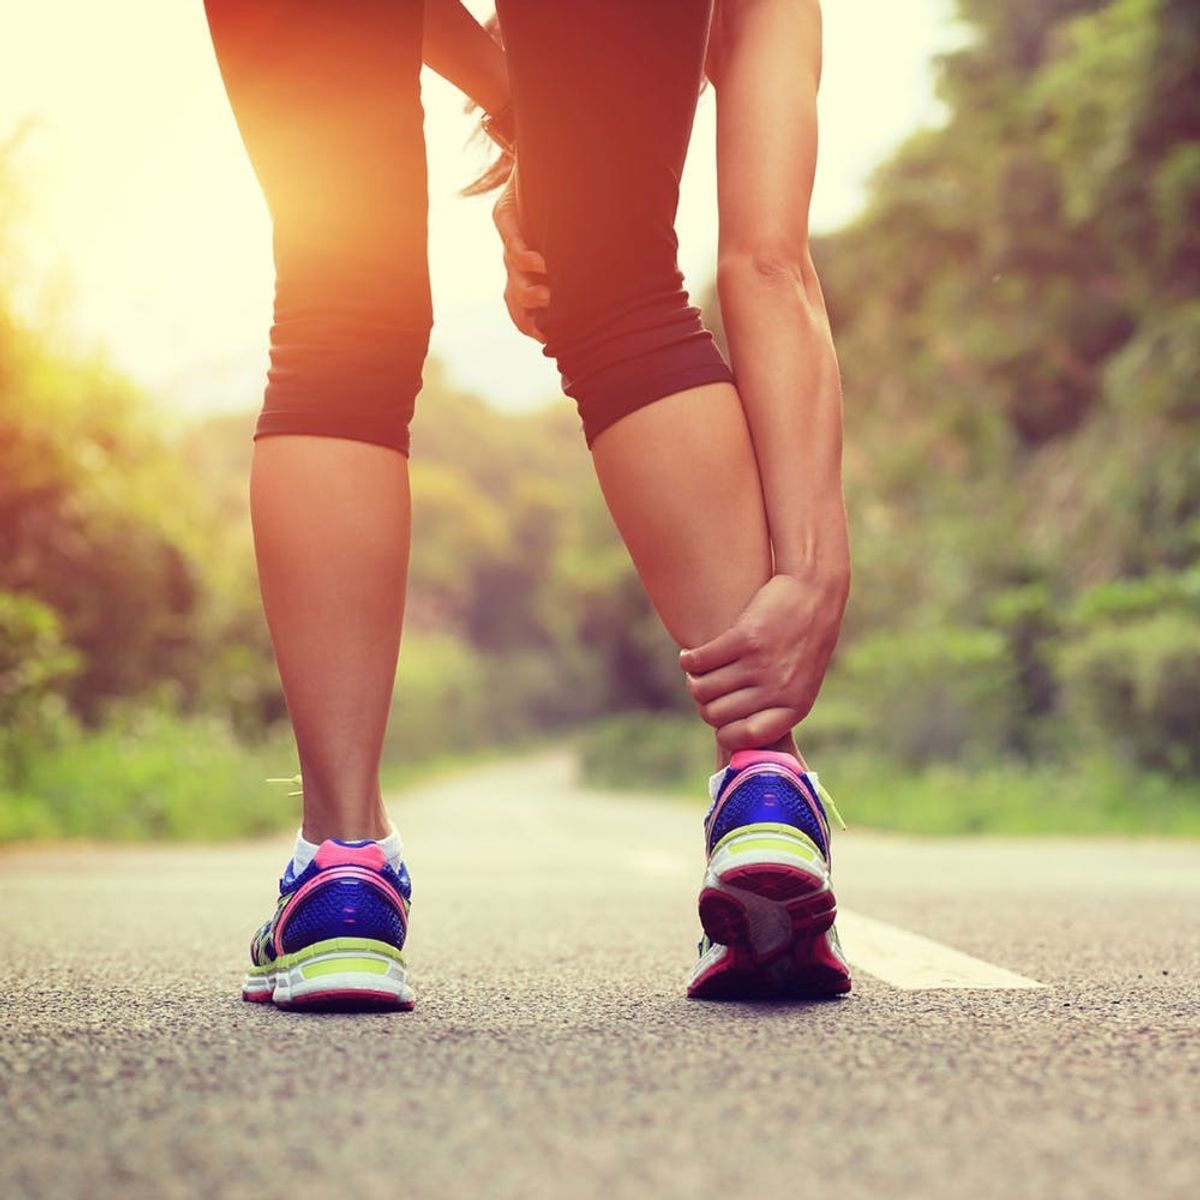 5 Common Running Injuries + How to Fix Them